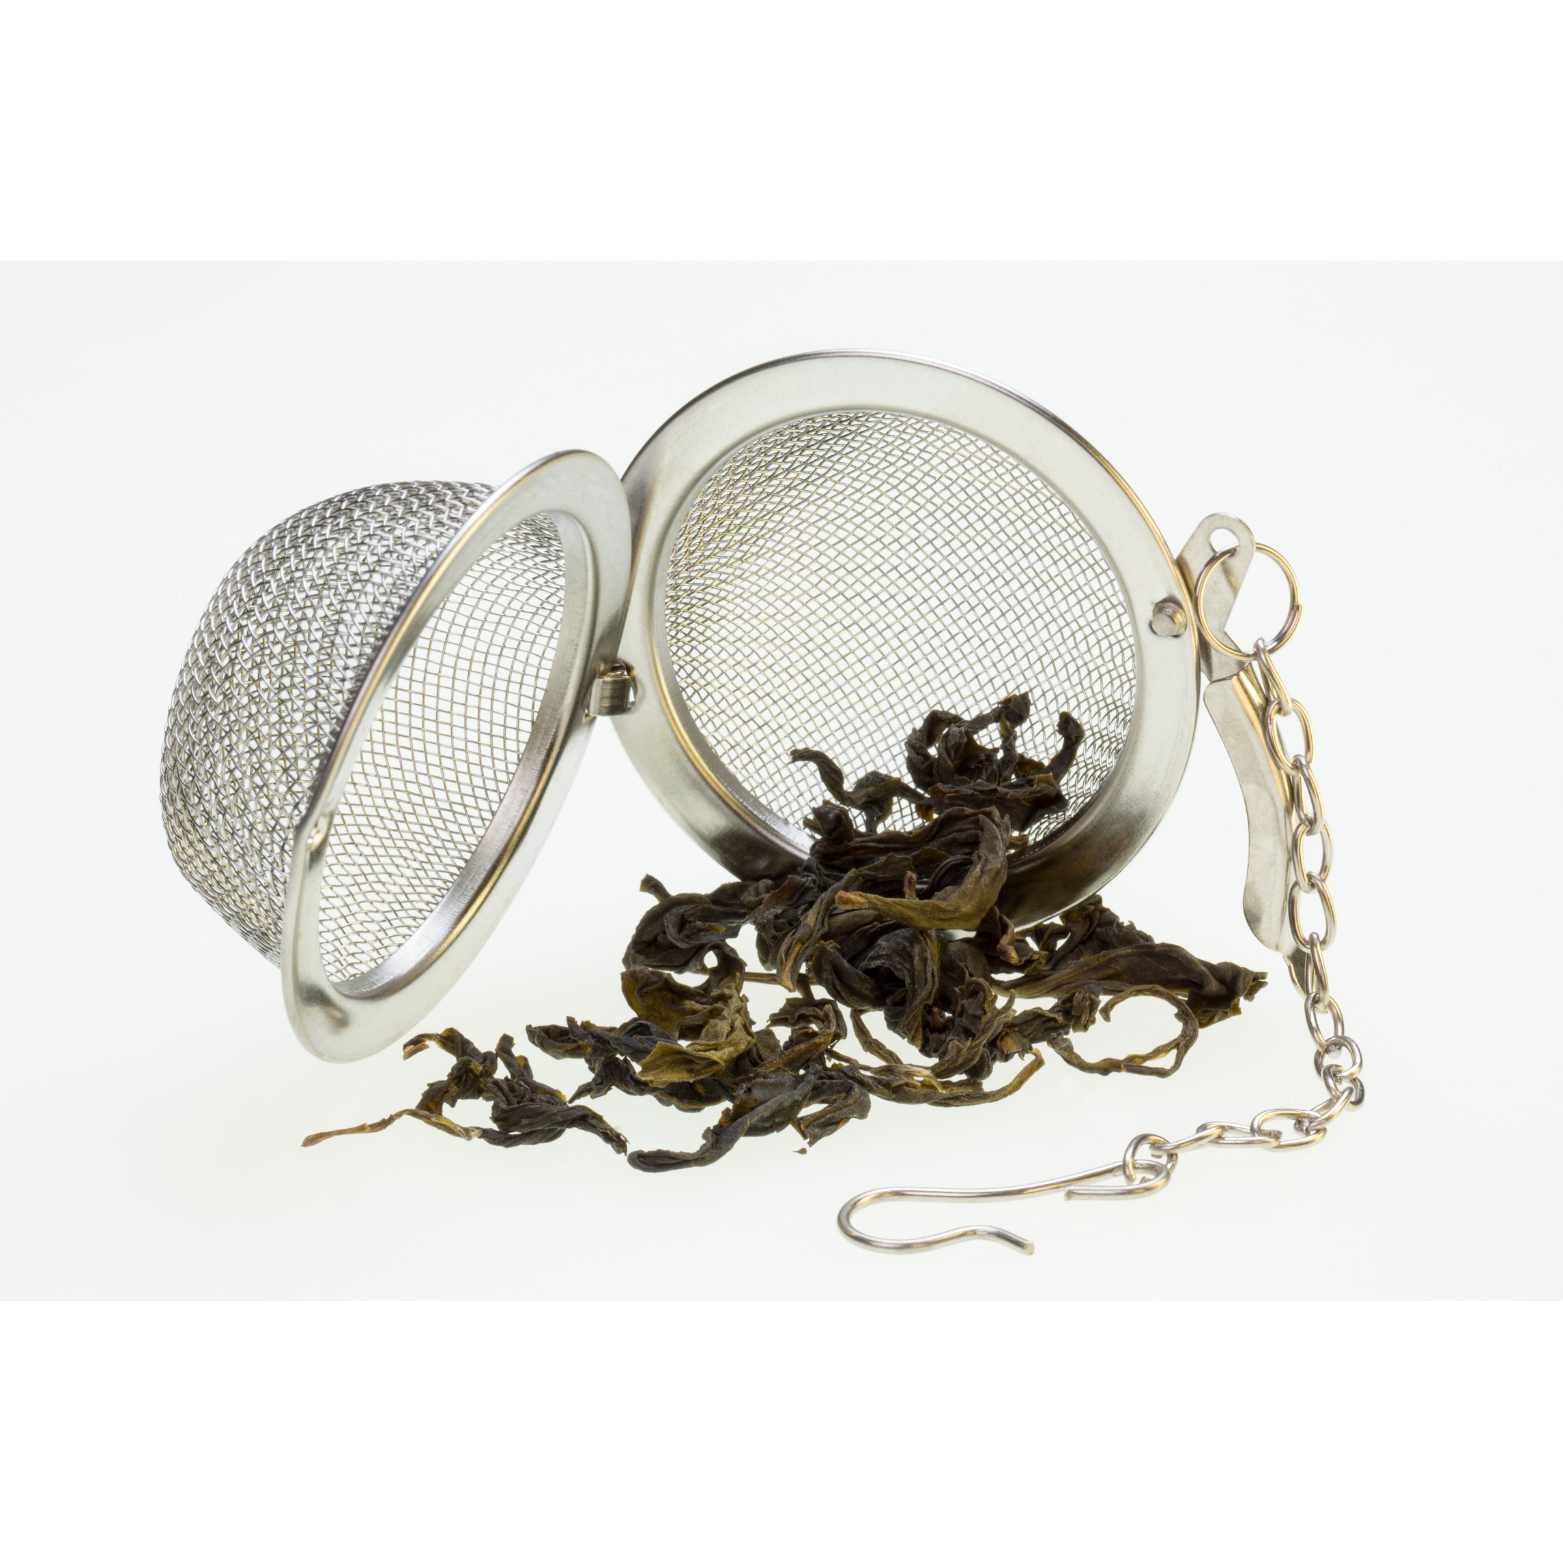 Witchy Poohs Tea Infuser Mesh Ball for Brewing Loose Leaf Tea 1.5 with Wooden Spoon